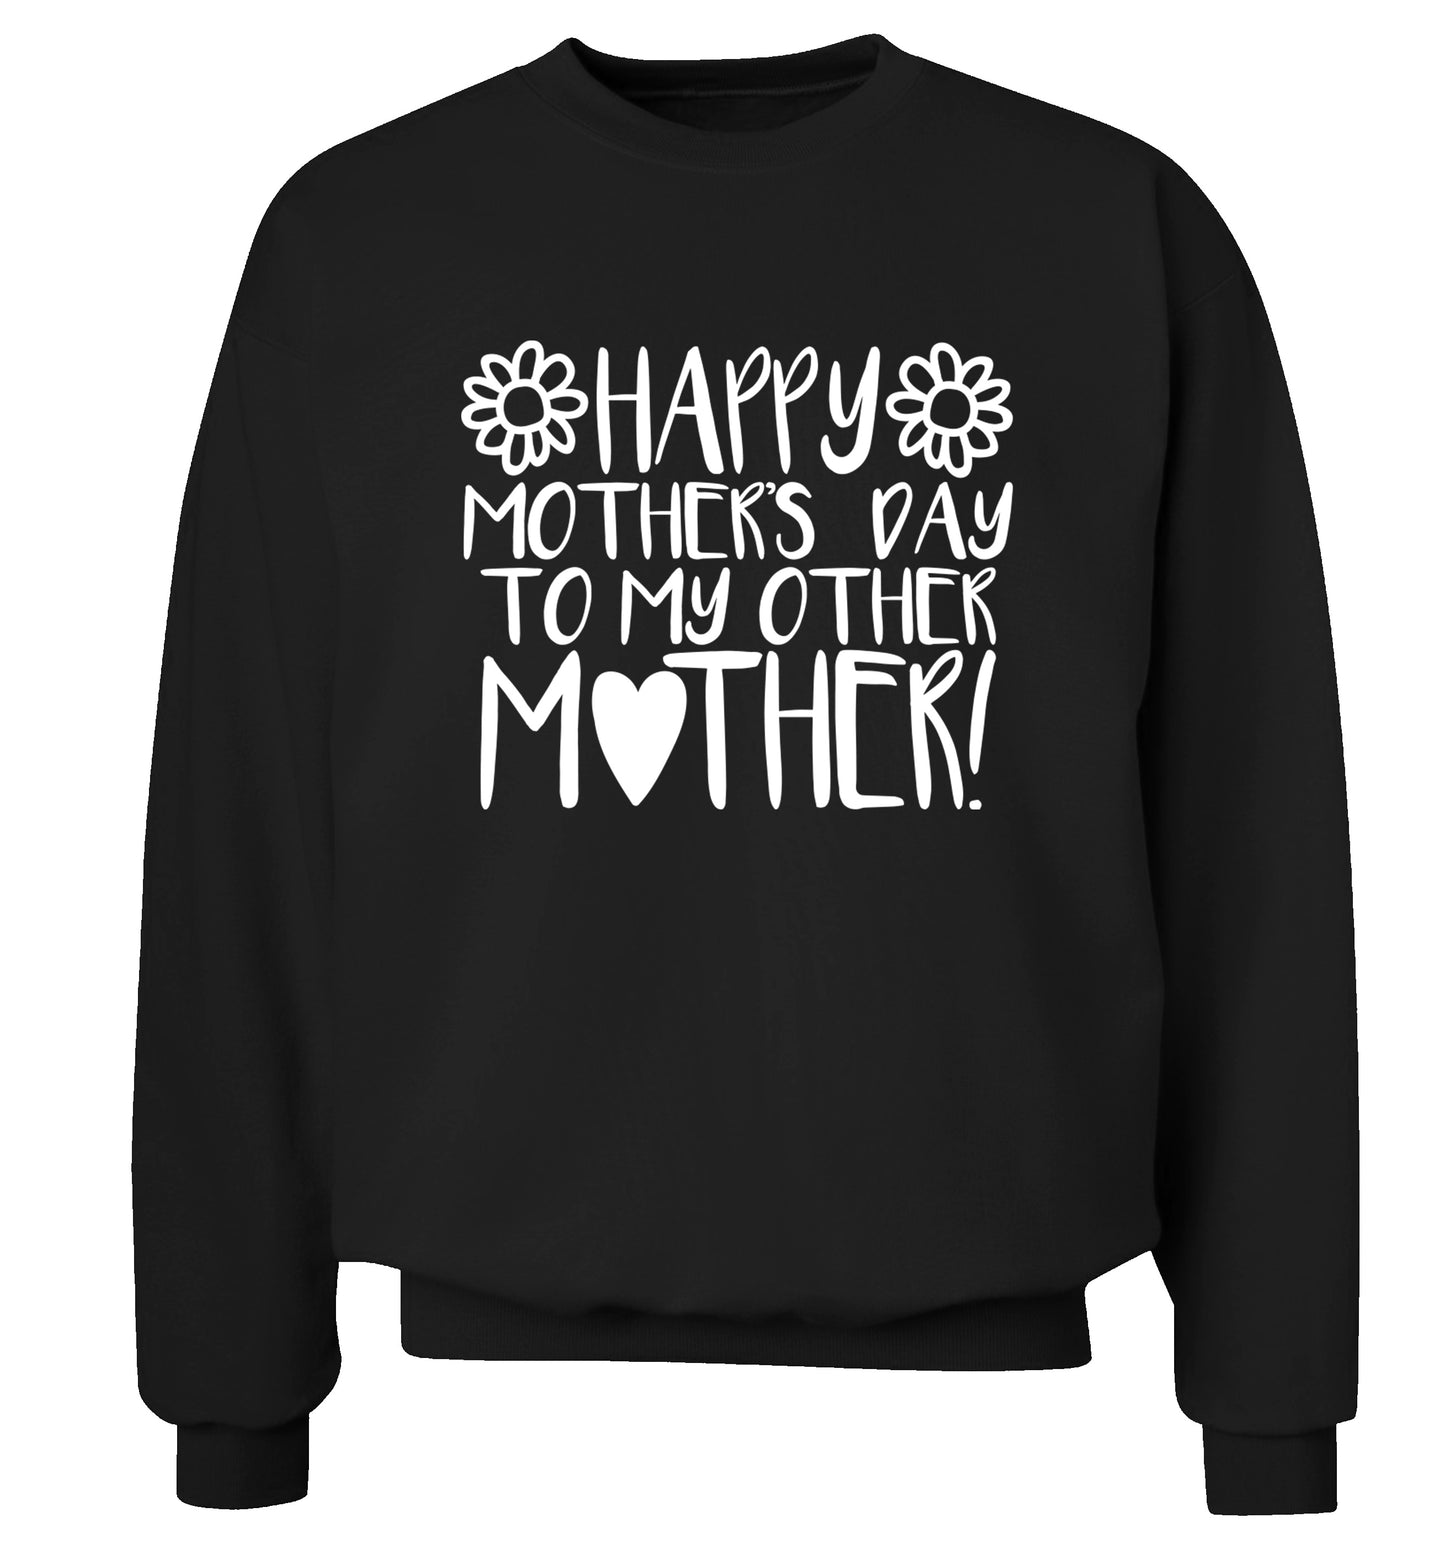 Happy mother's day to my other mother Adult's unisex black Sweater 2XL